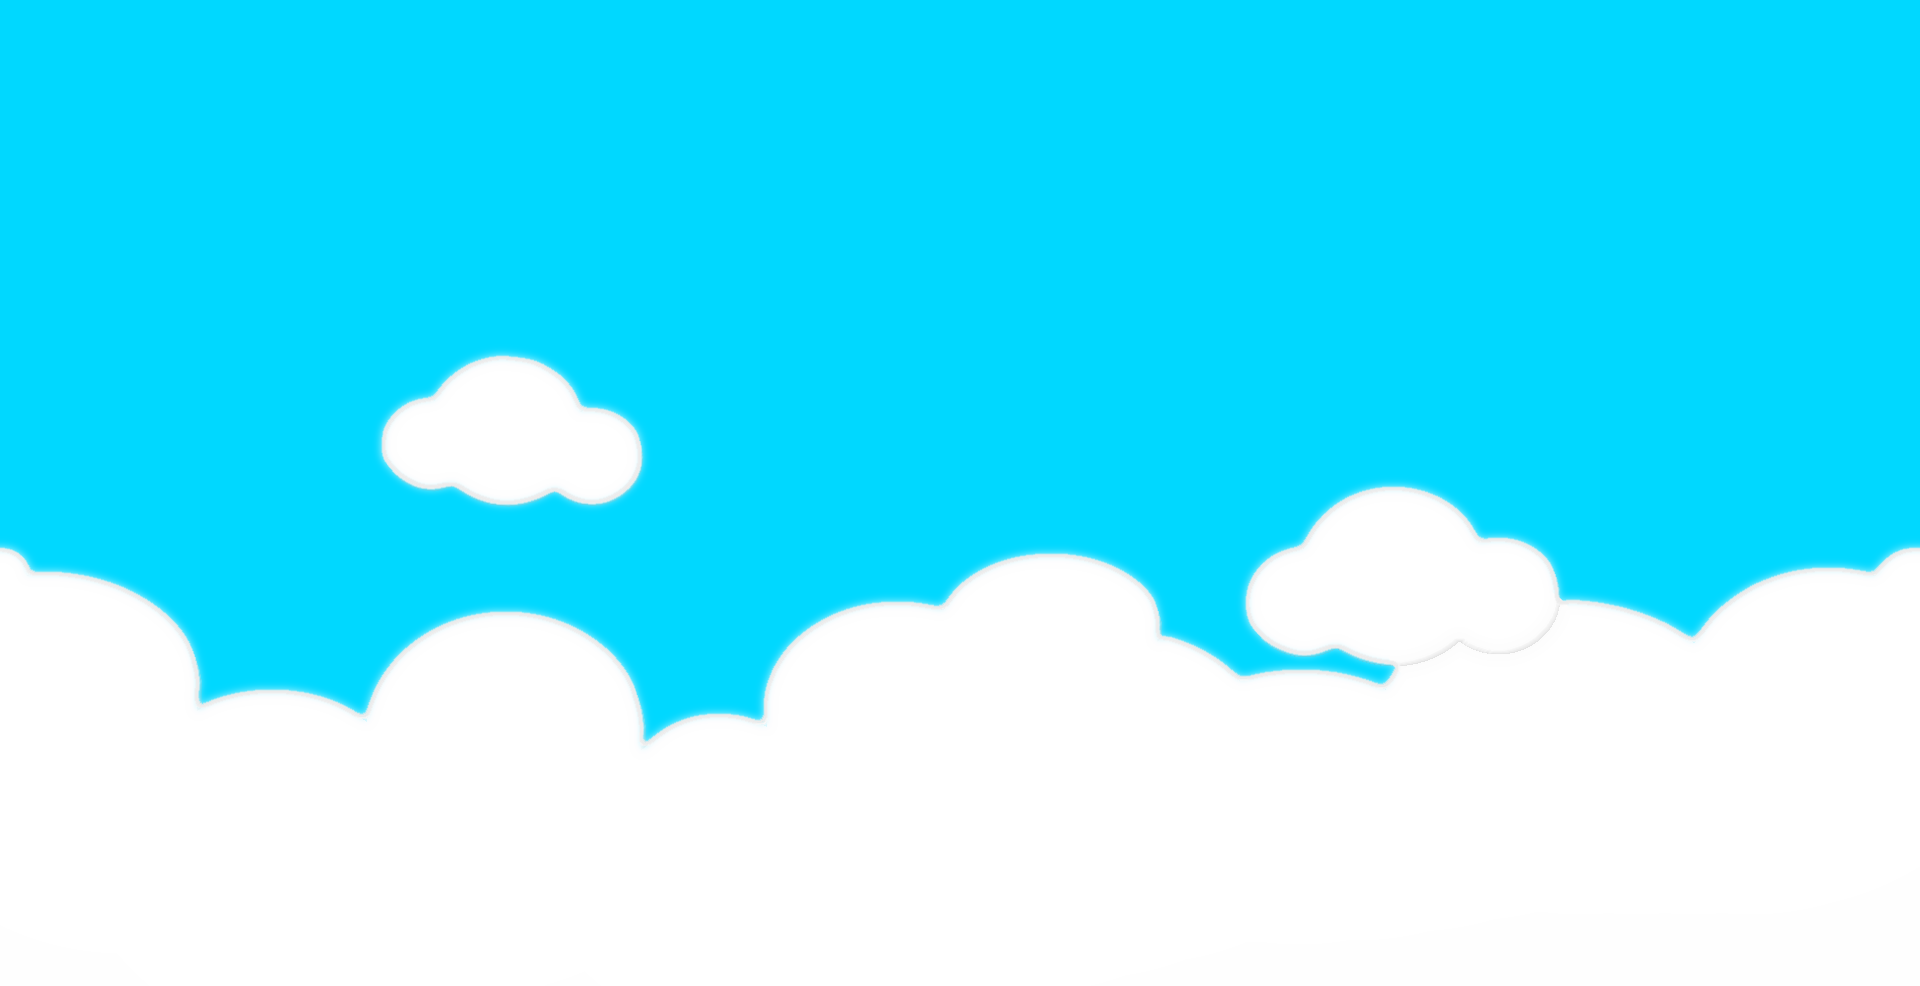 Cartoony Cloud Images | OpenGameArt.org